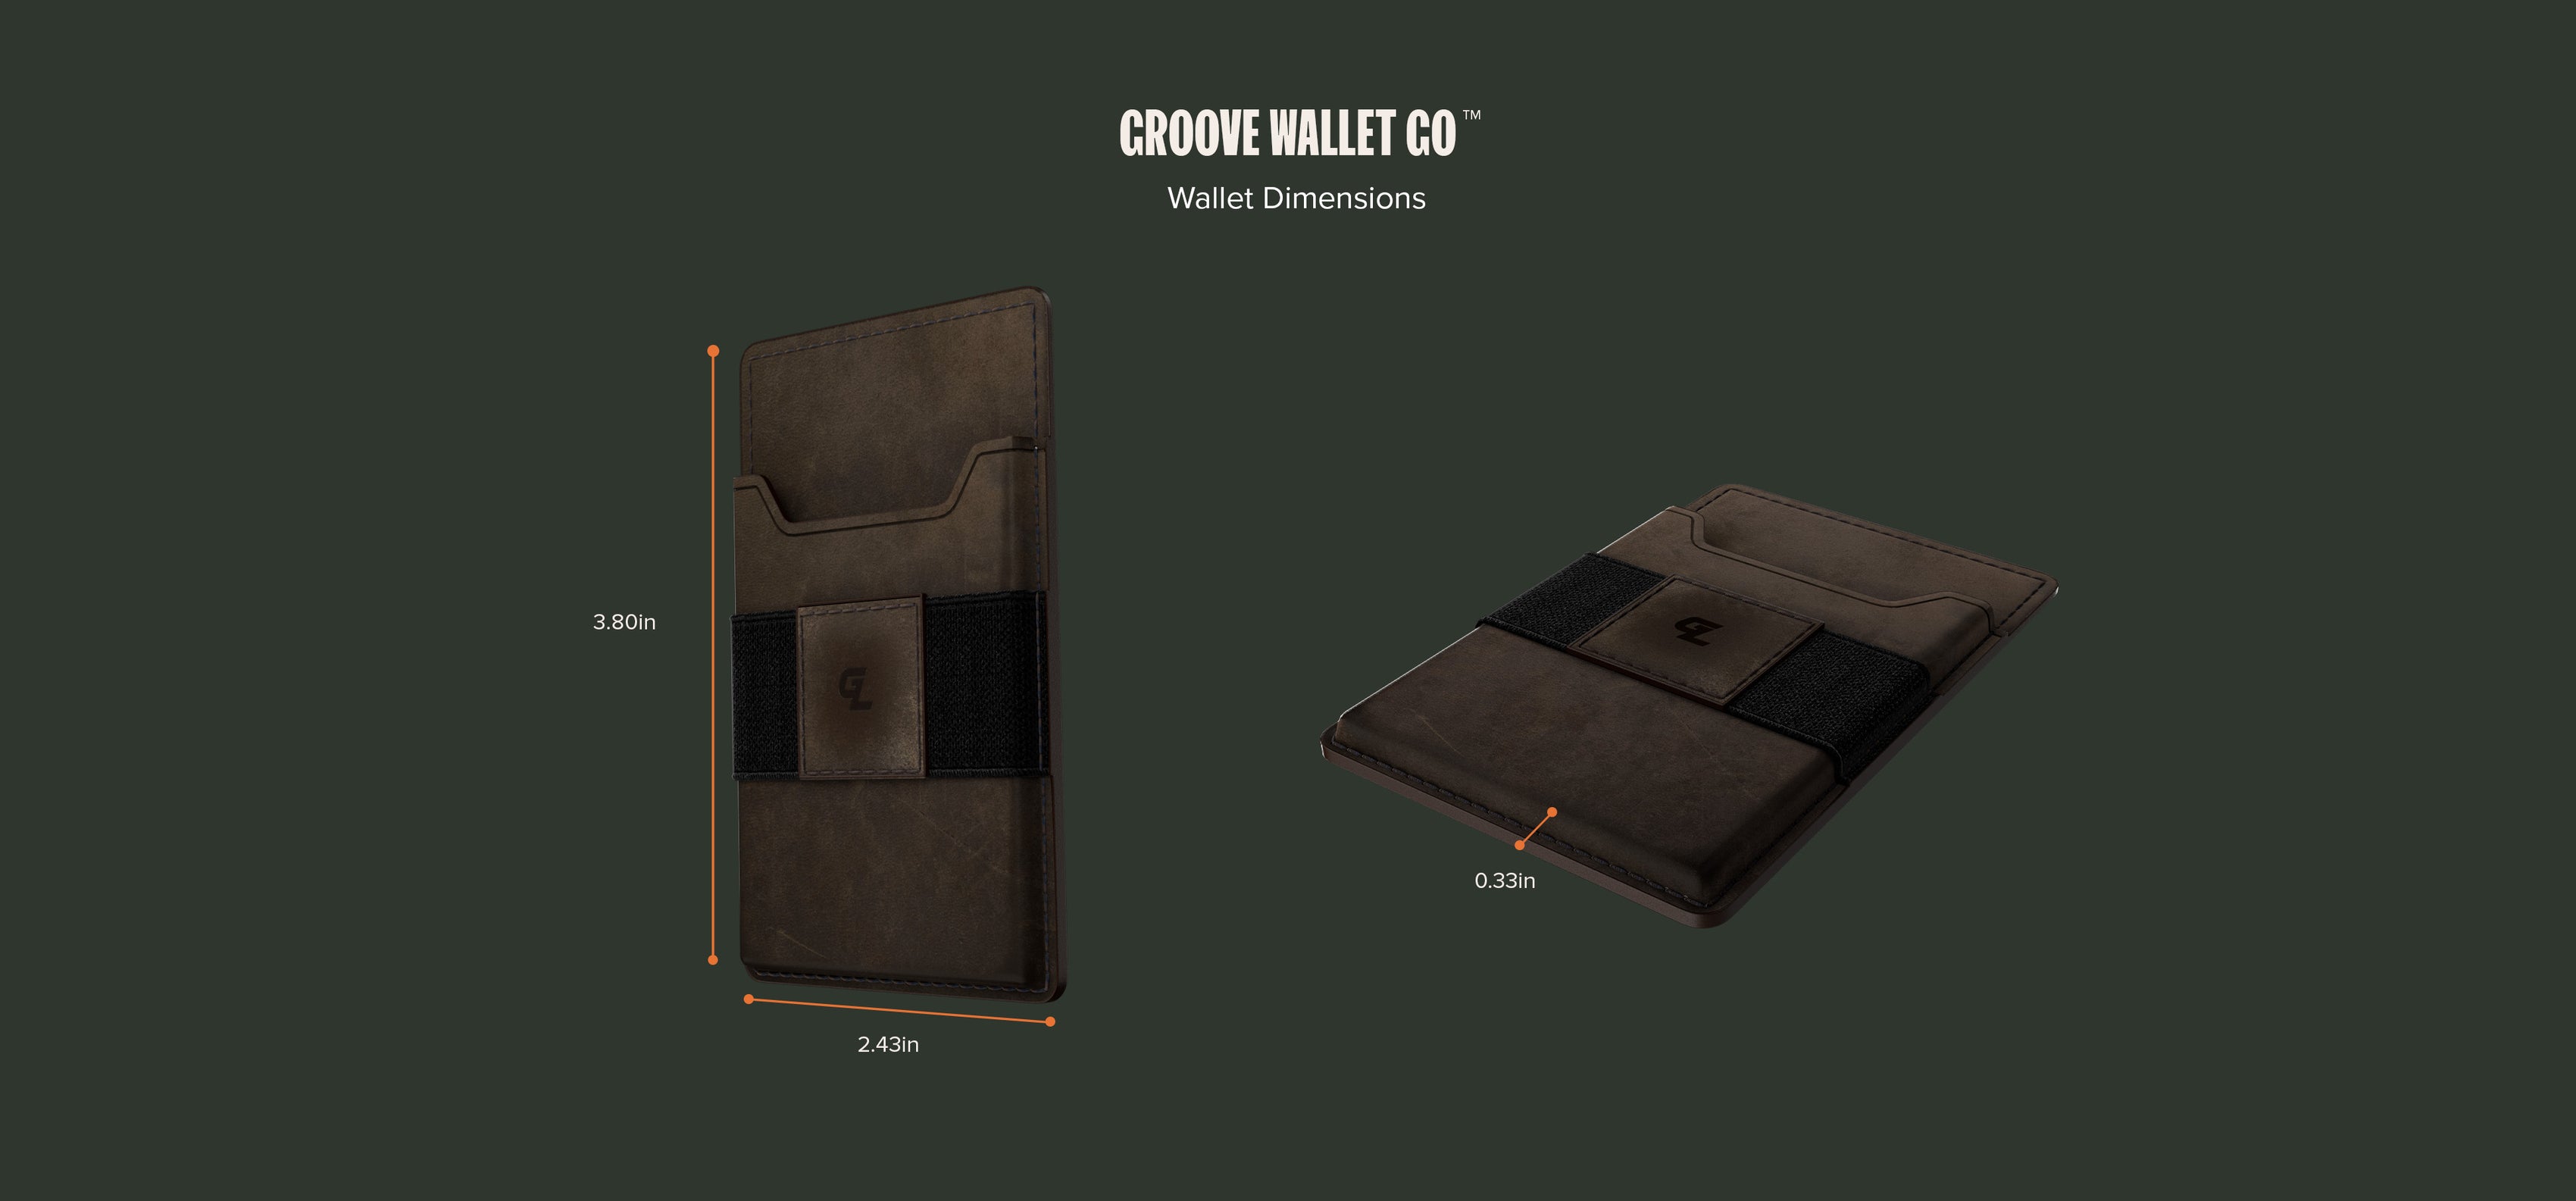 Groove Wallet Go Wallet Dimensions